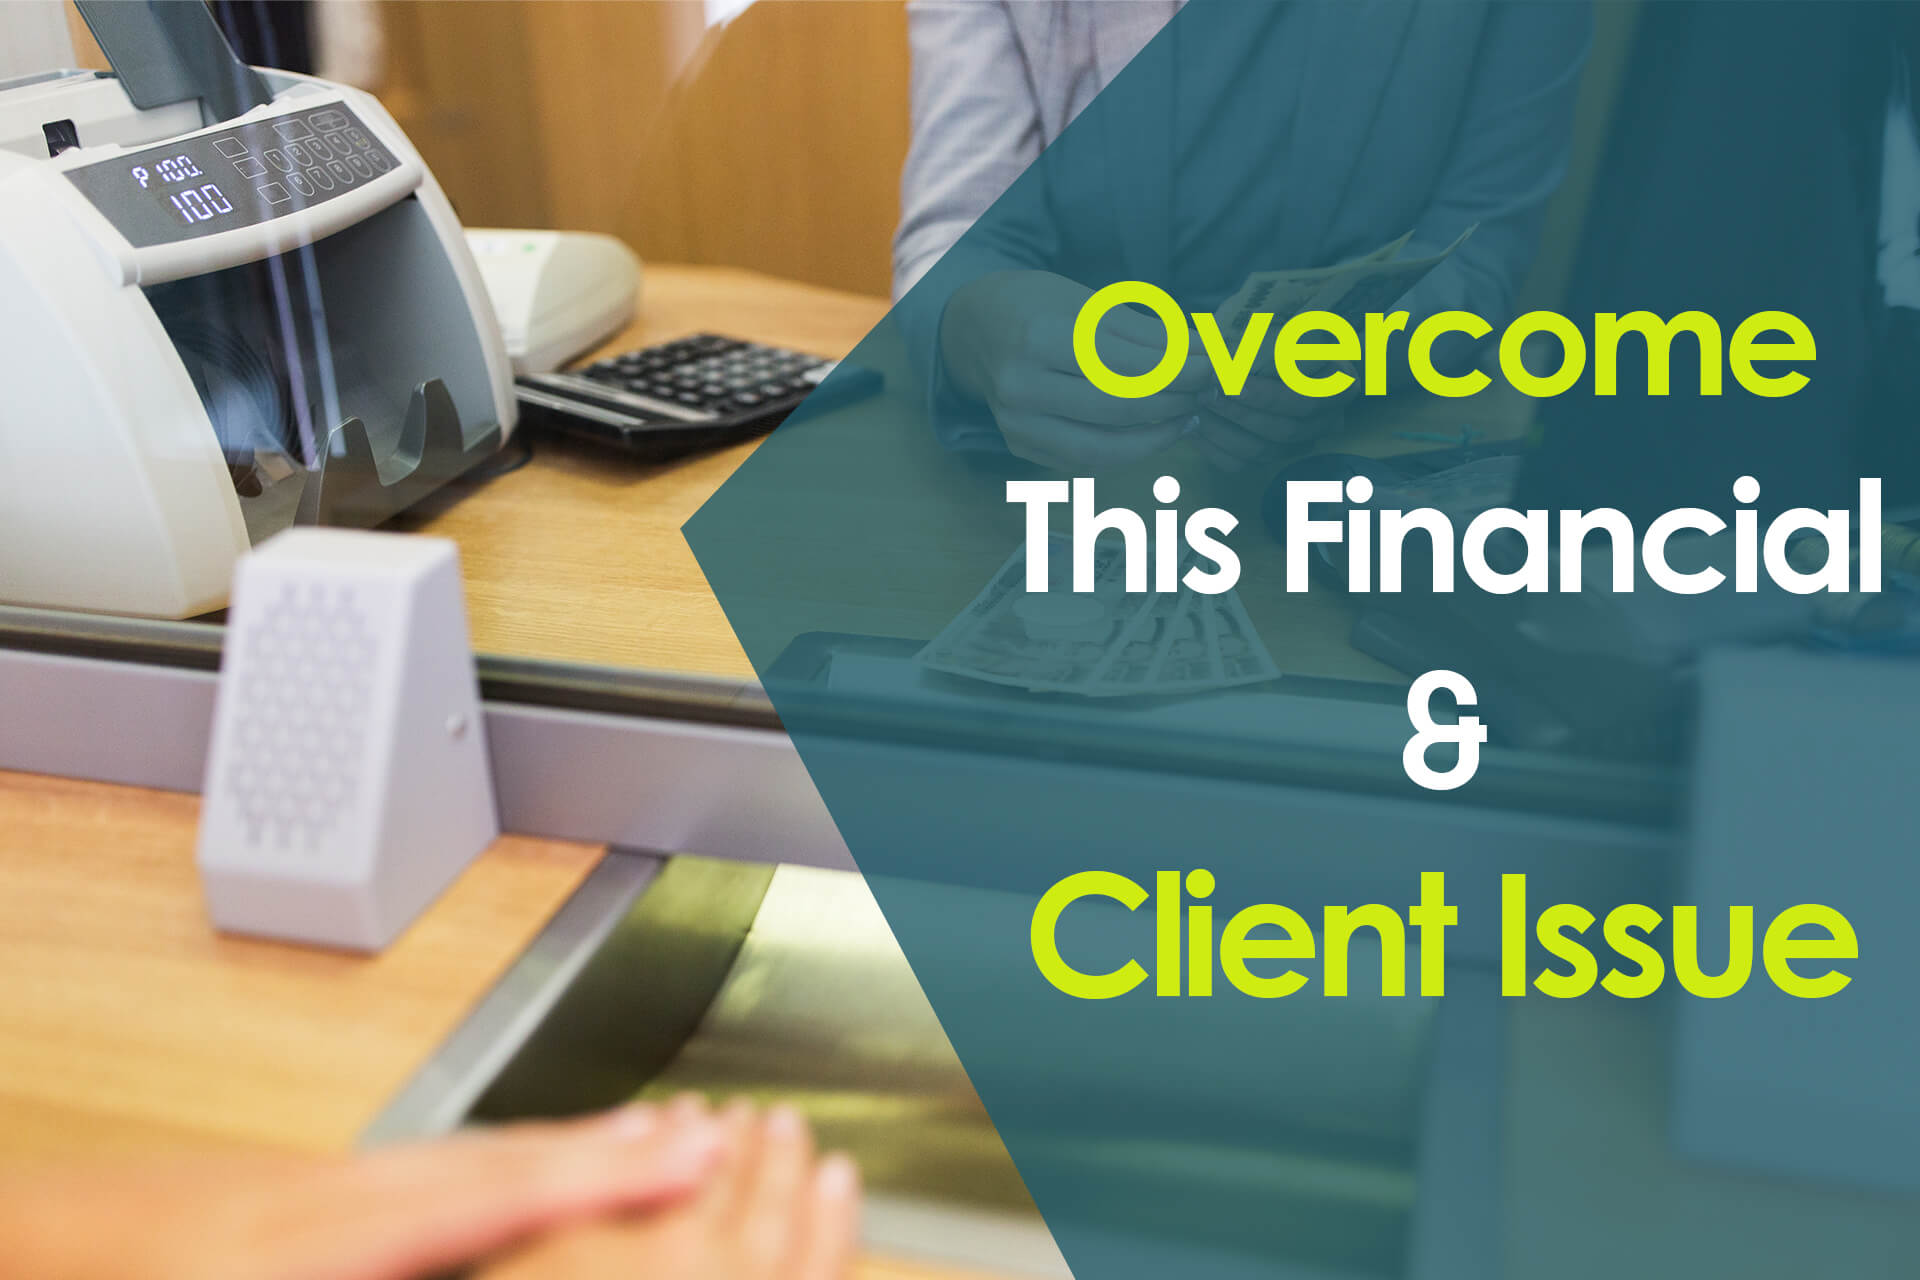 Overcome This Financial & Client Issue